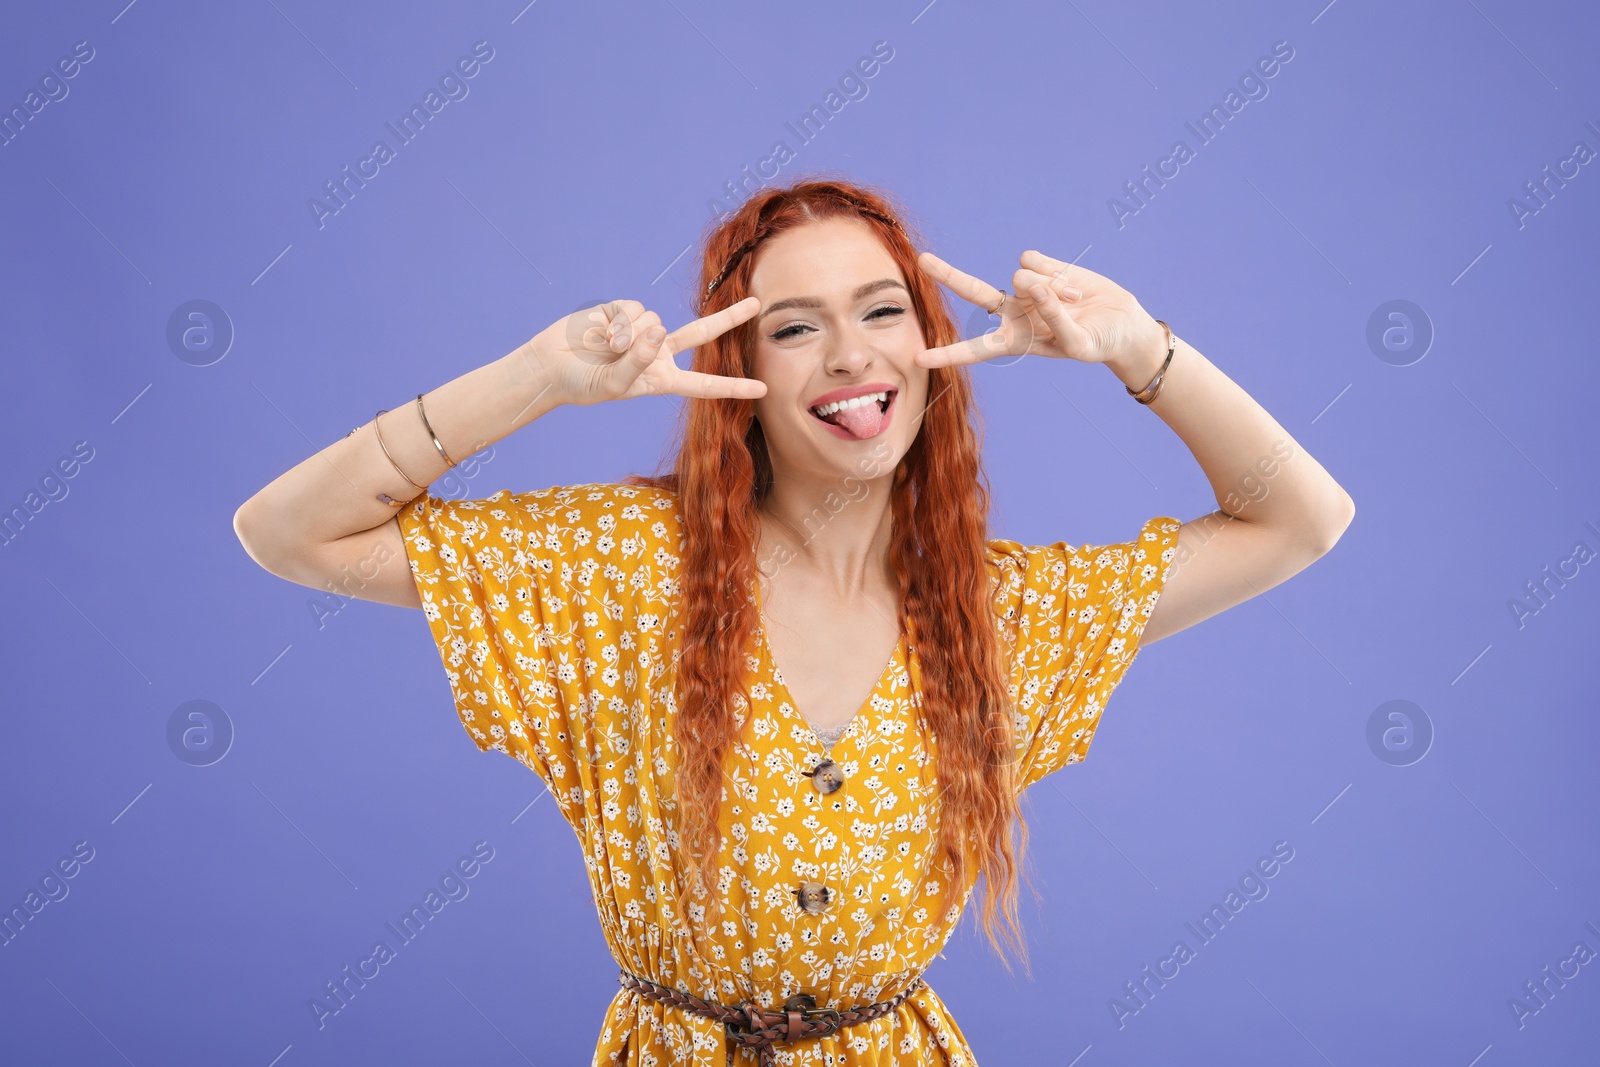 Photo of Beautiful young hippie woman showing V-sign on violet background